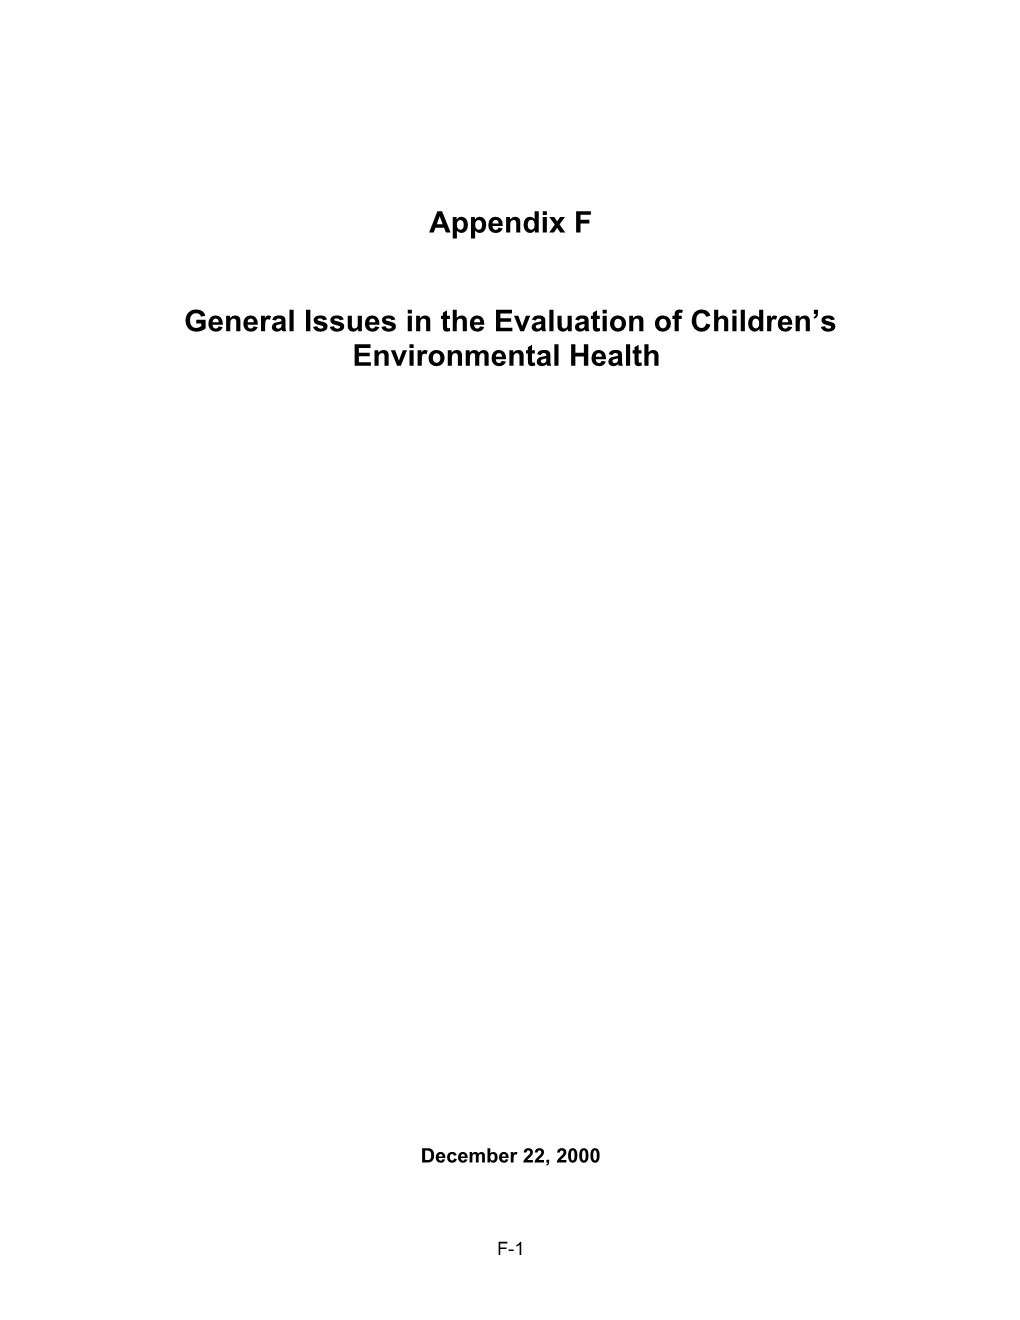 General Issues in the Evaluation of Children S Environmental Health